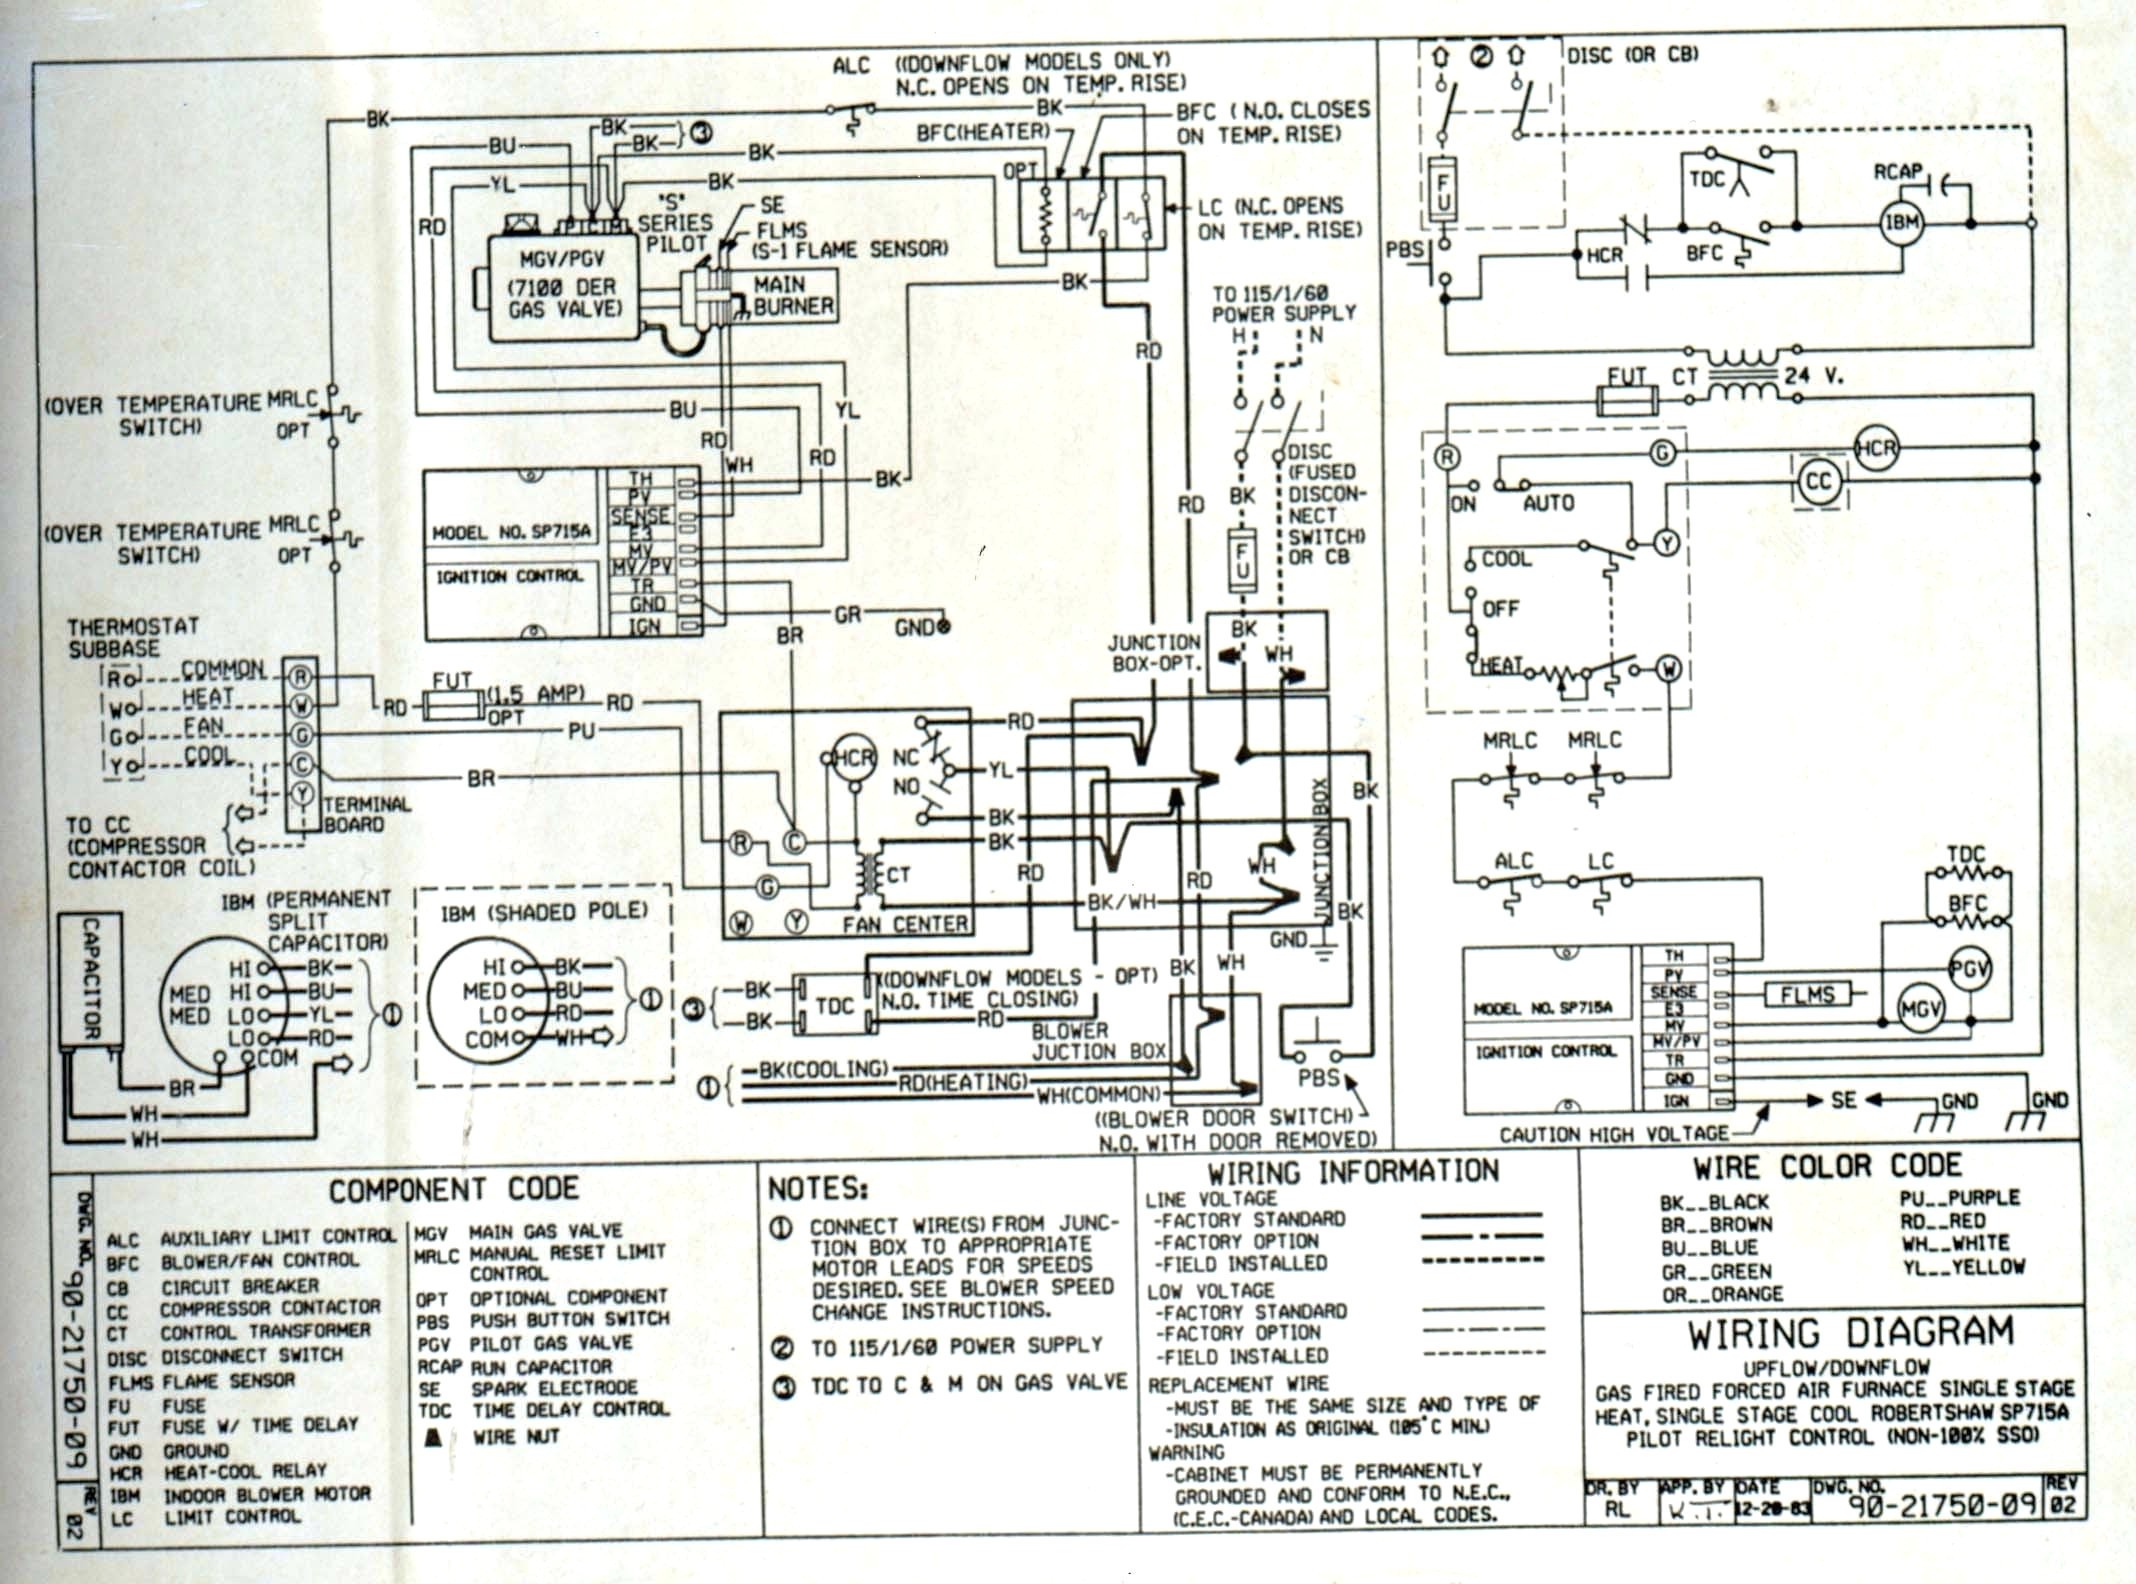 York Rooftop Unit Wiring Diagram Free Downloads Wiring Diagram for York Air Conditioner Refrence Wiring Diagram